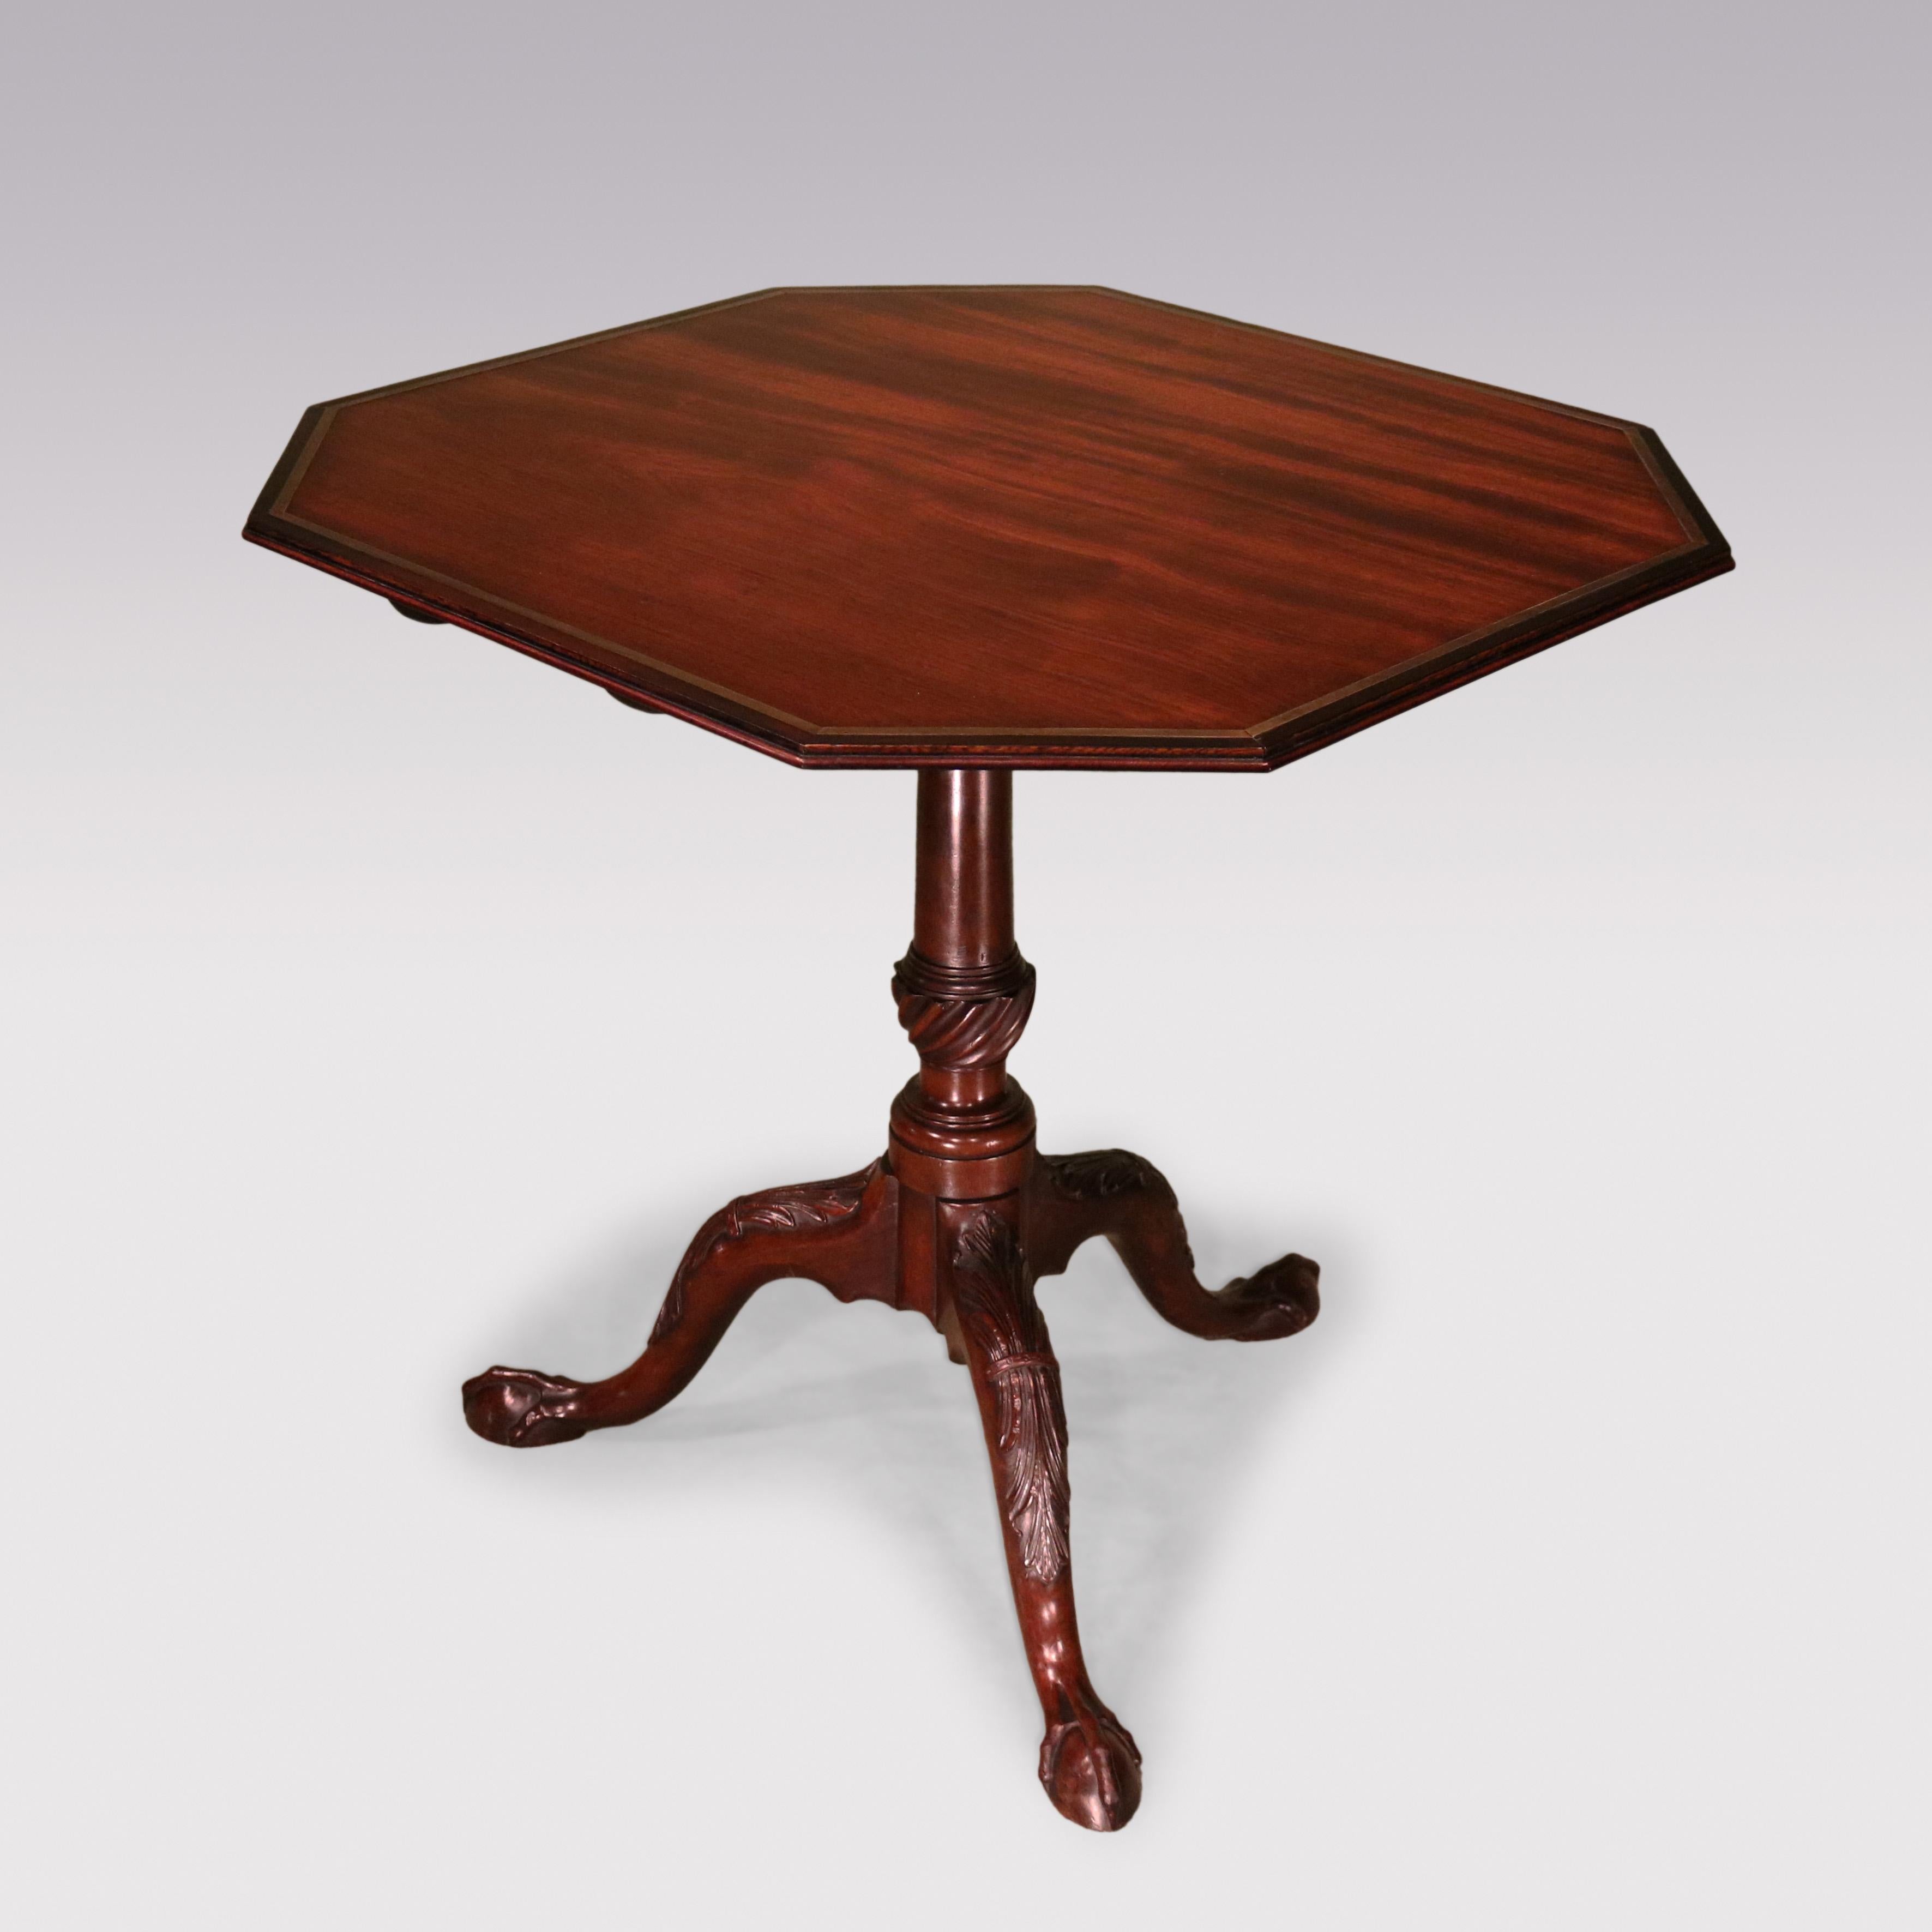 A mid-18th Century Chippendale period figured mahogany Tripod Table having octagonal rectangular top with moulded edge, banding and brass line inlay raised on gun-barrel stem with vase turnings ending on acanthus carved legs on claw & ball feet.